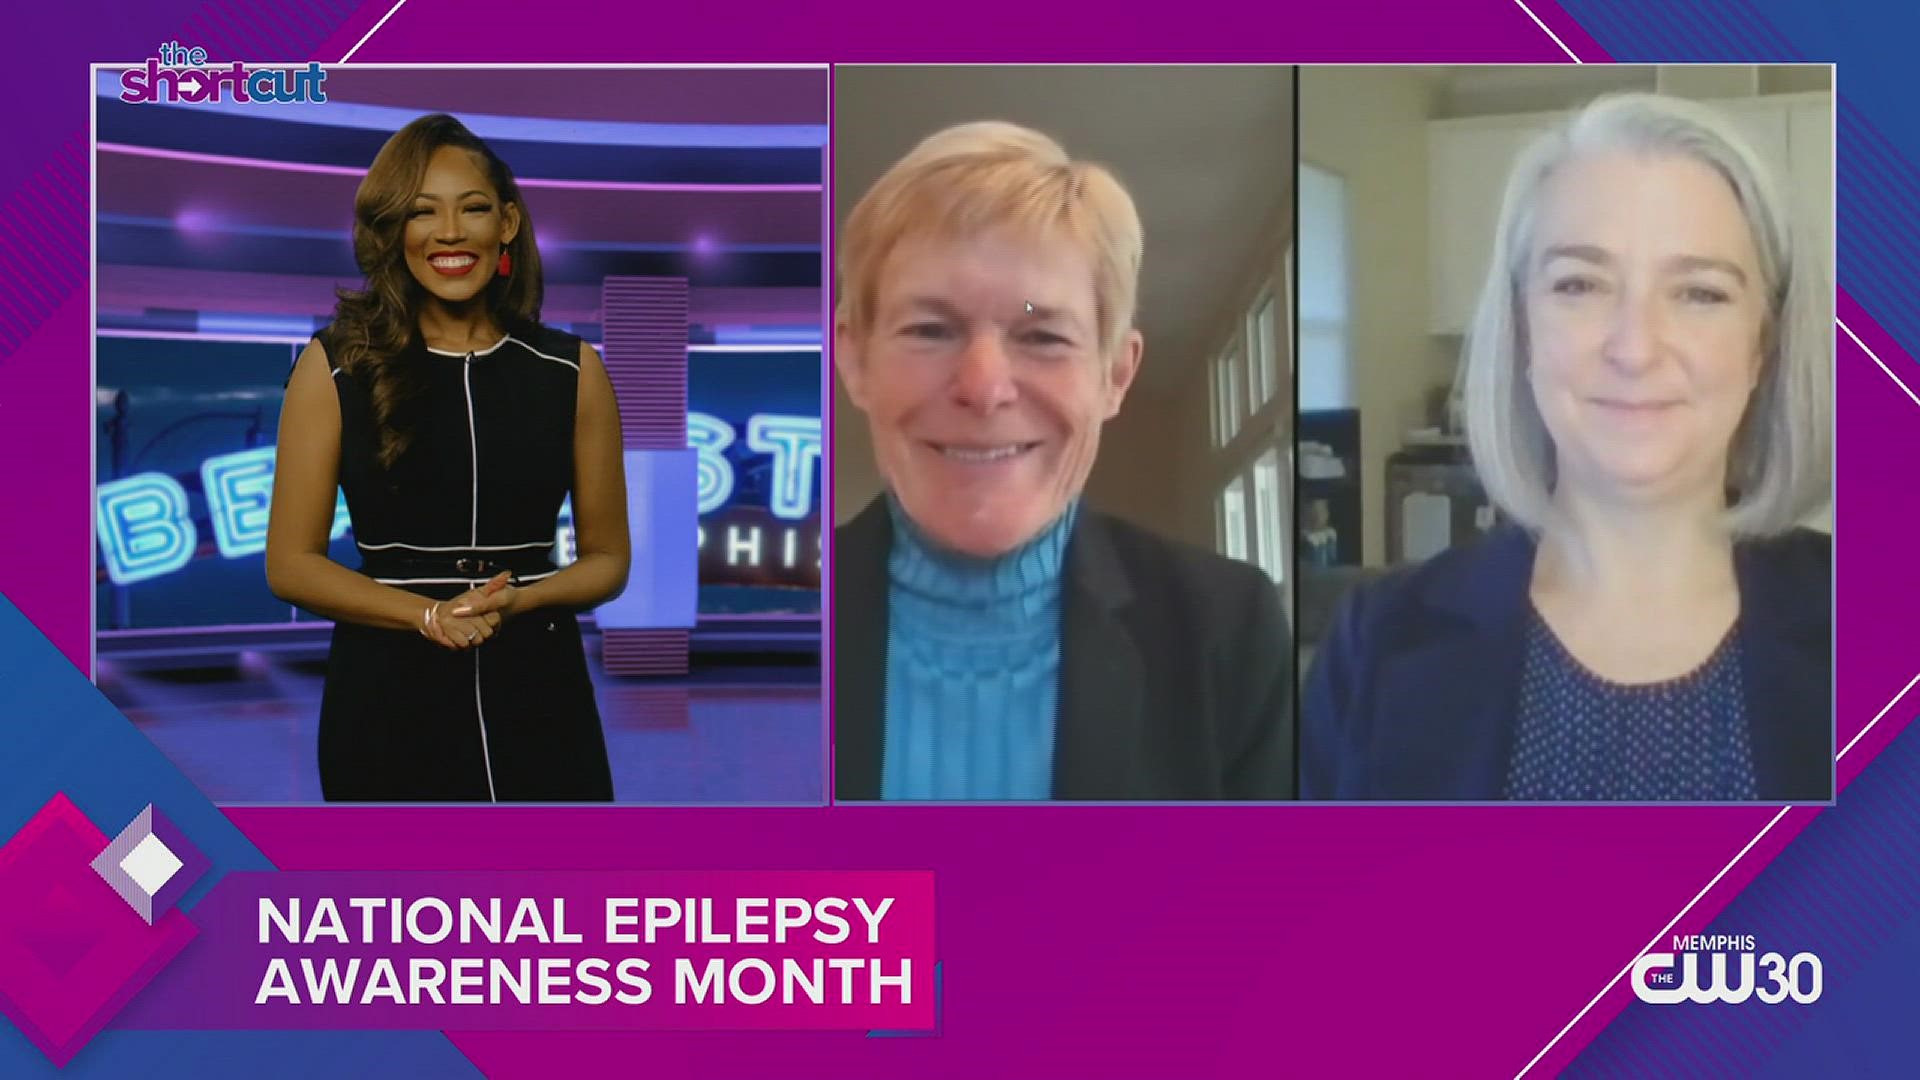 In honor of National Epilepsy Awareness Month, join Sydney Neely, Dr. Mary Zupanc, and mother April Fontaine for an insight into dravet syndrome and much more!